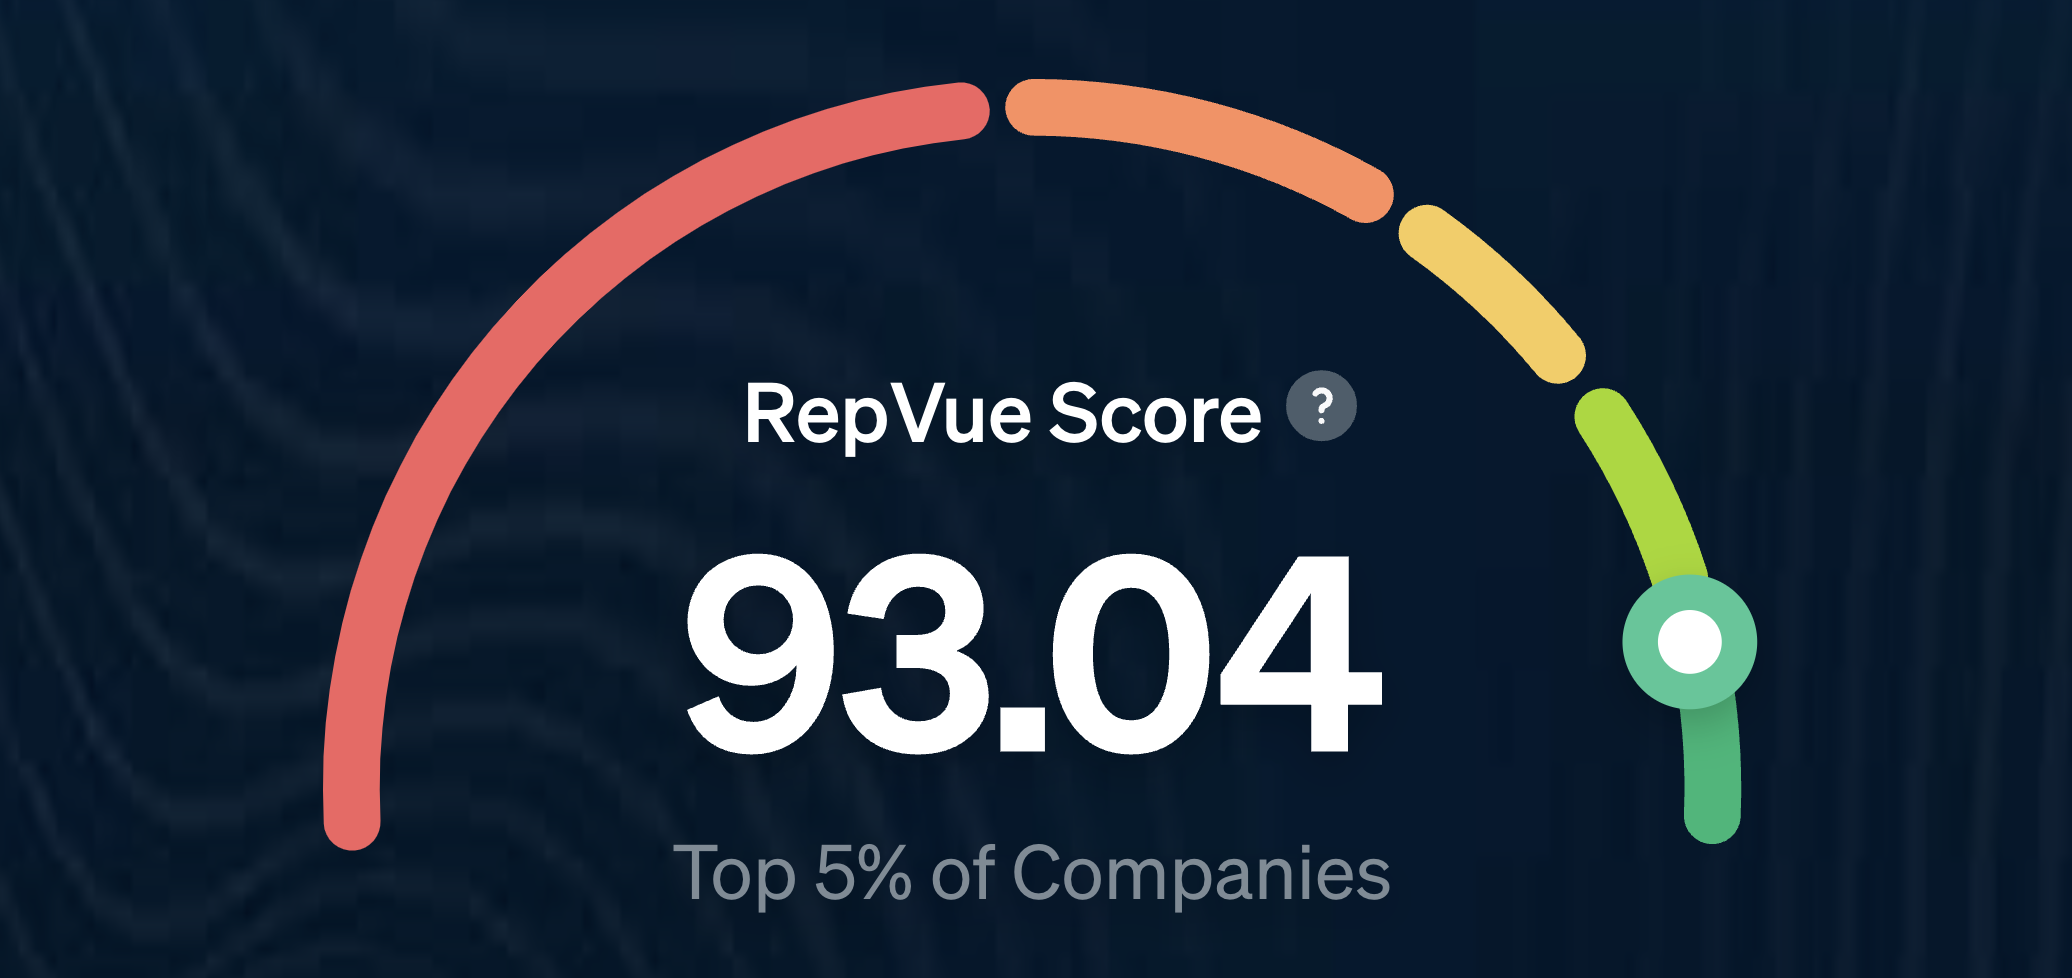 Nectar Sales Org Recognized as a Top 5% Sales Org by RepVue